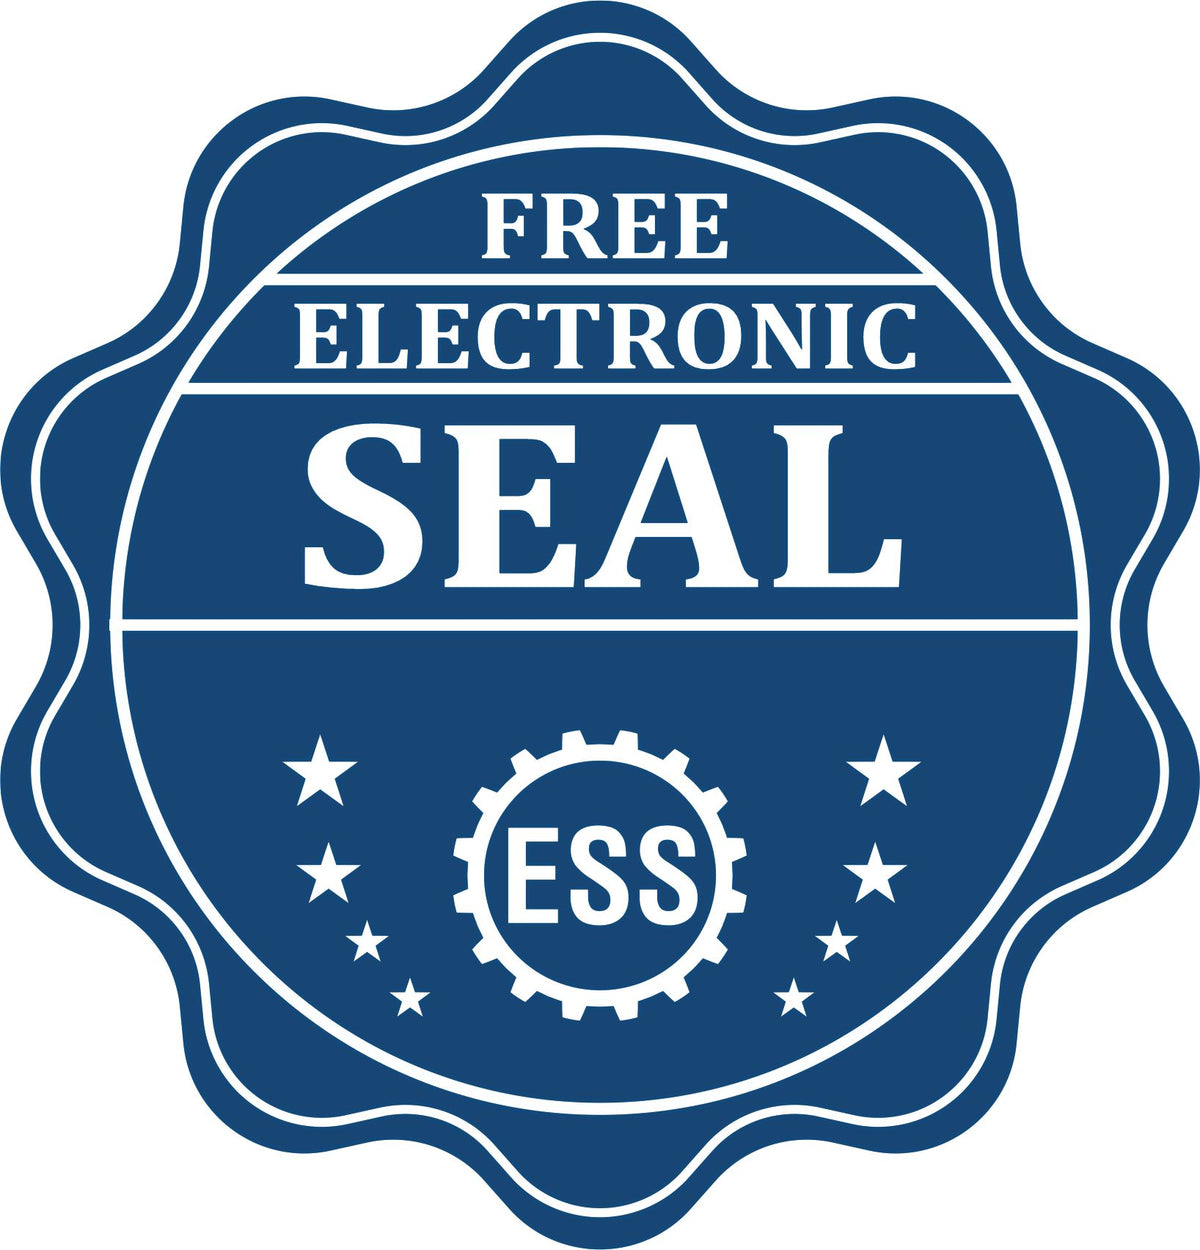 A badge showing a free electronic seal for the Slim Pre-Inked Rhode Island Land Surveyor Seal Stamp with stars and the ESS gear on the emblem.